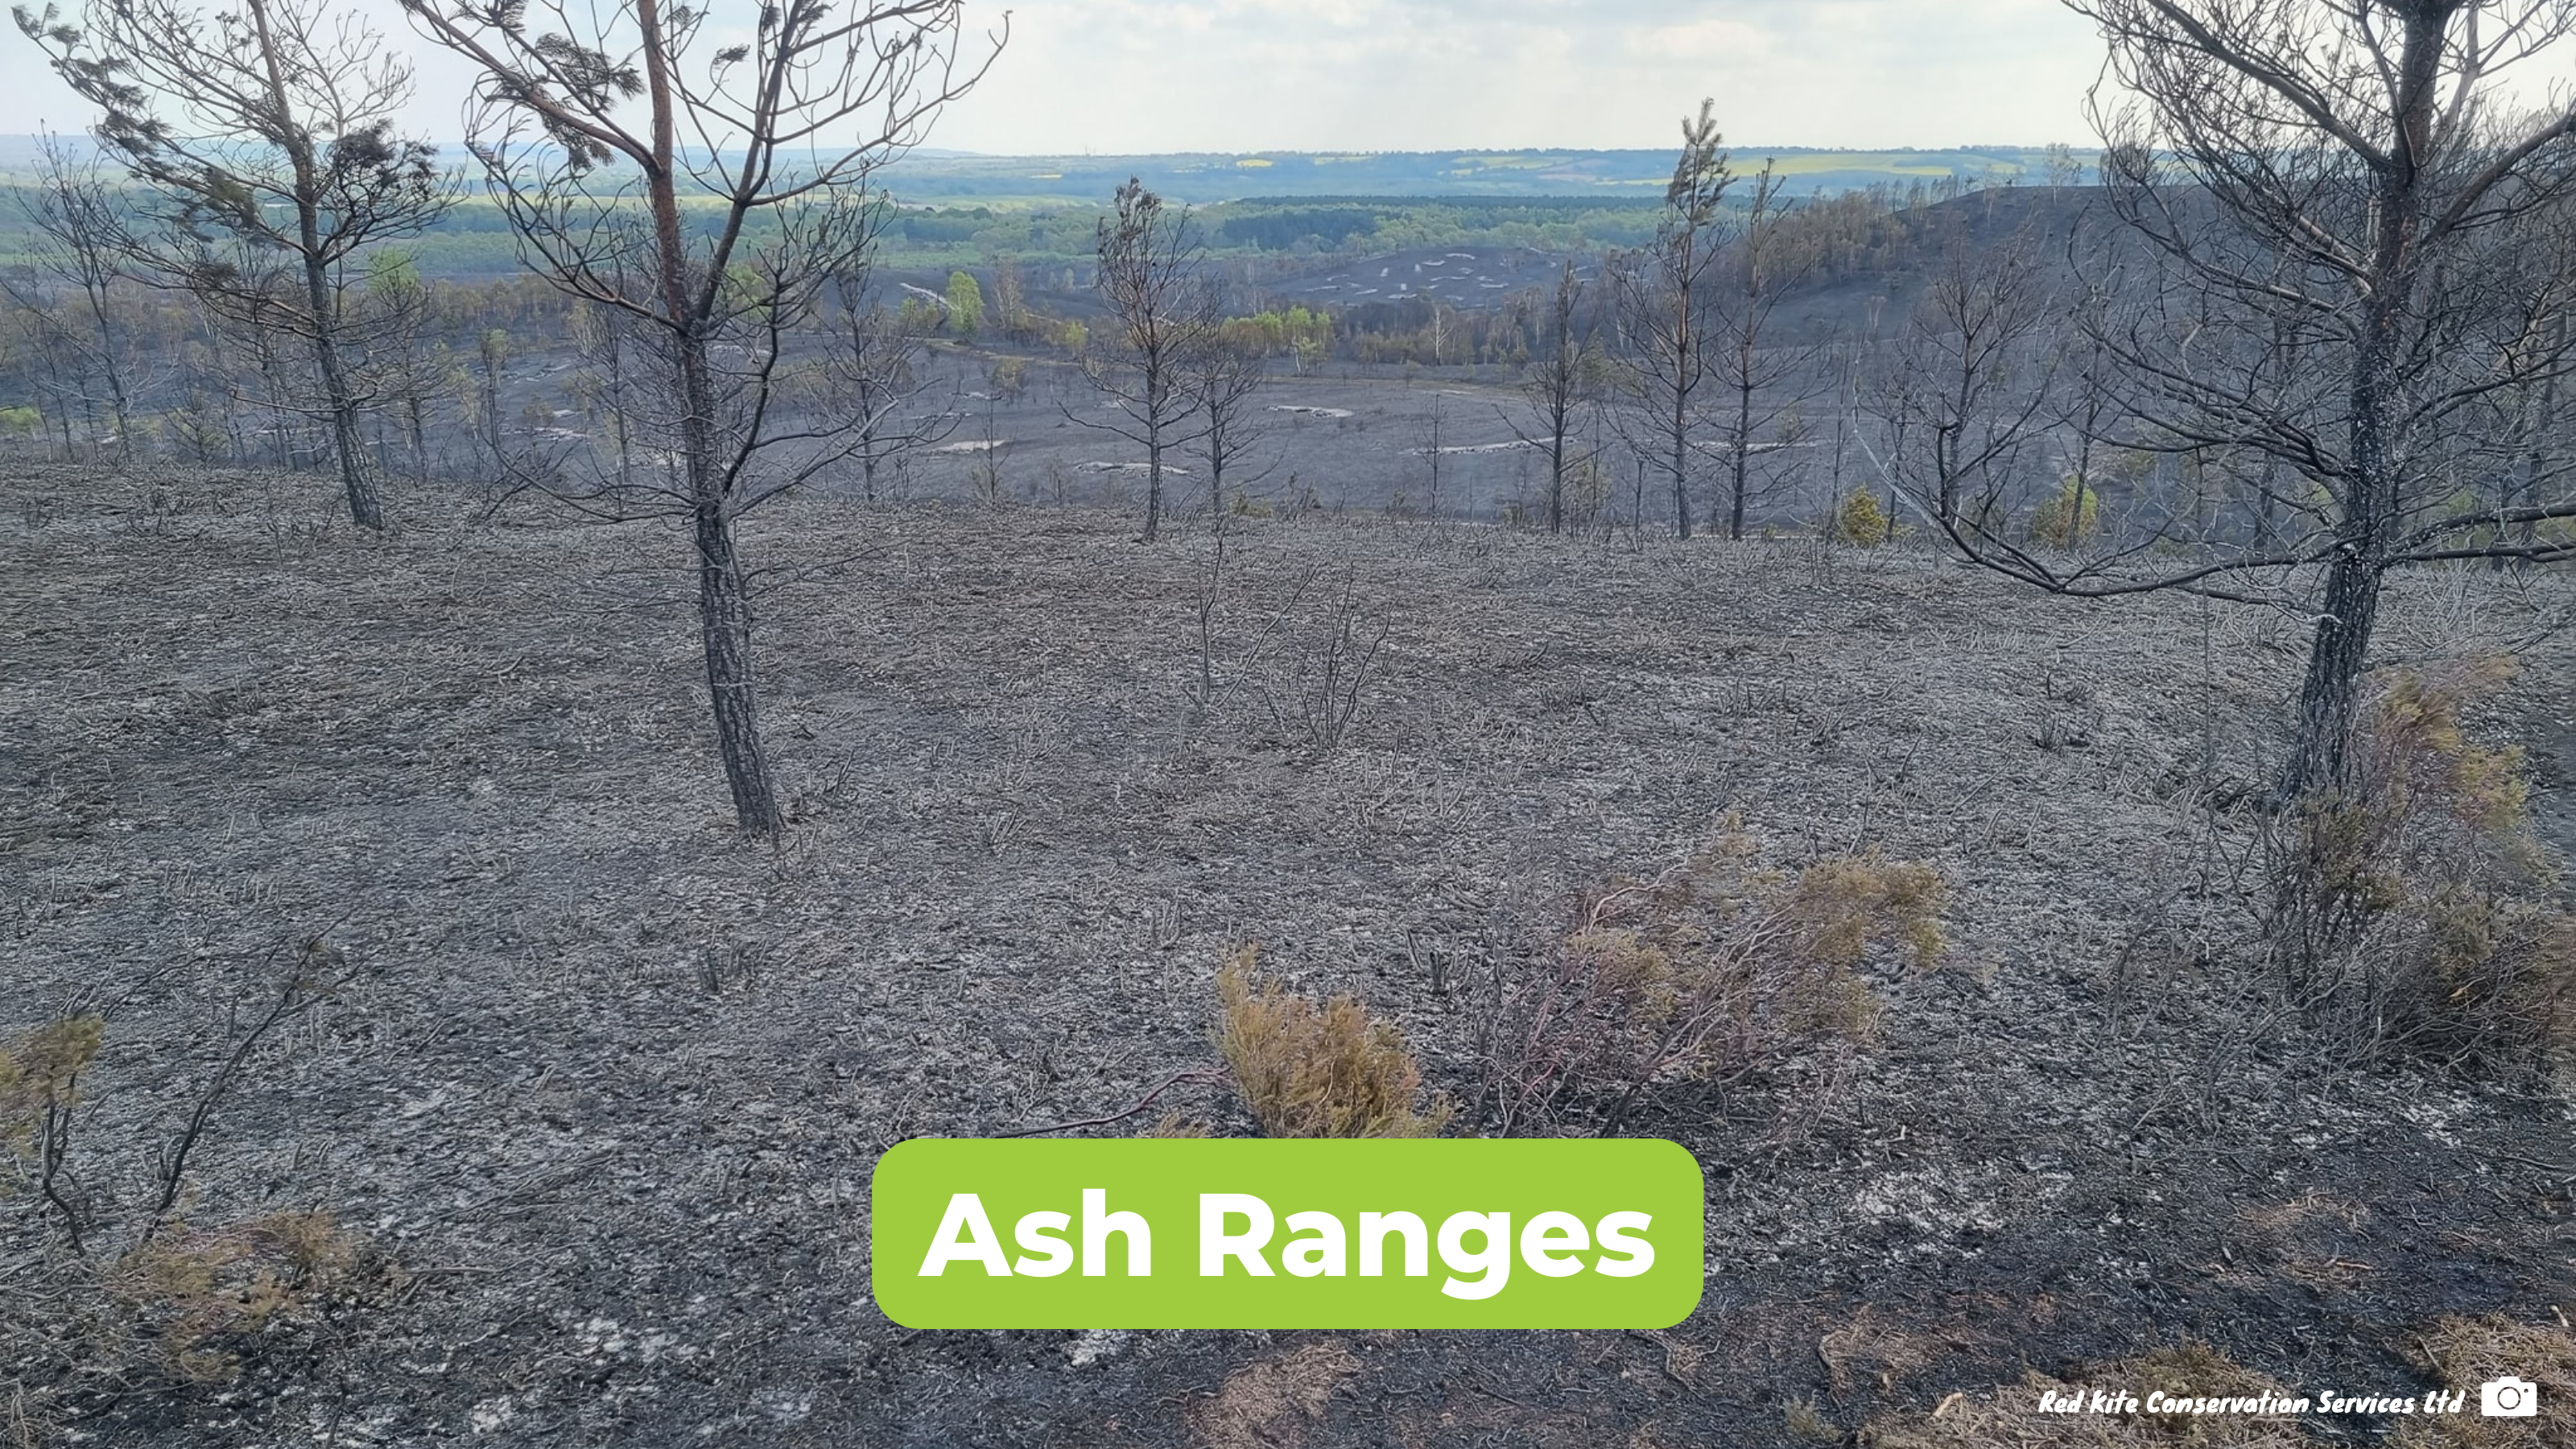 Photograph of the blackened landscape at Ash Ranges